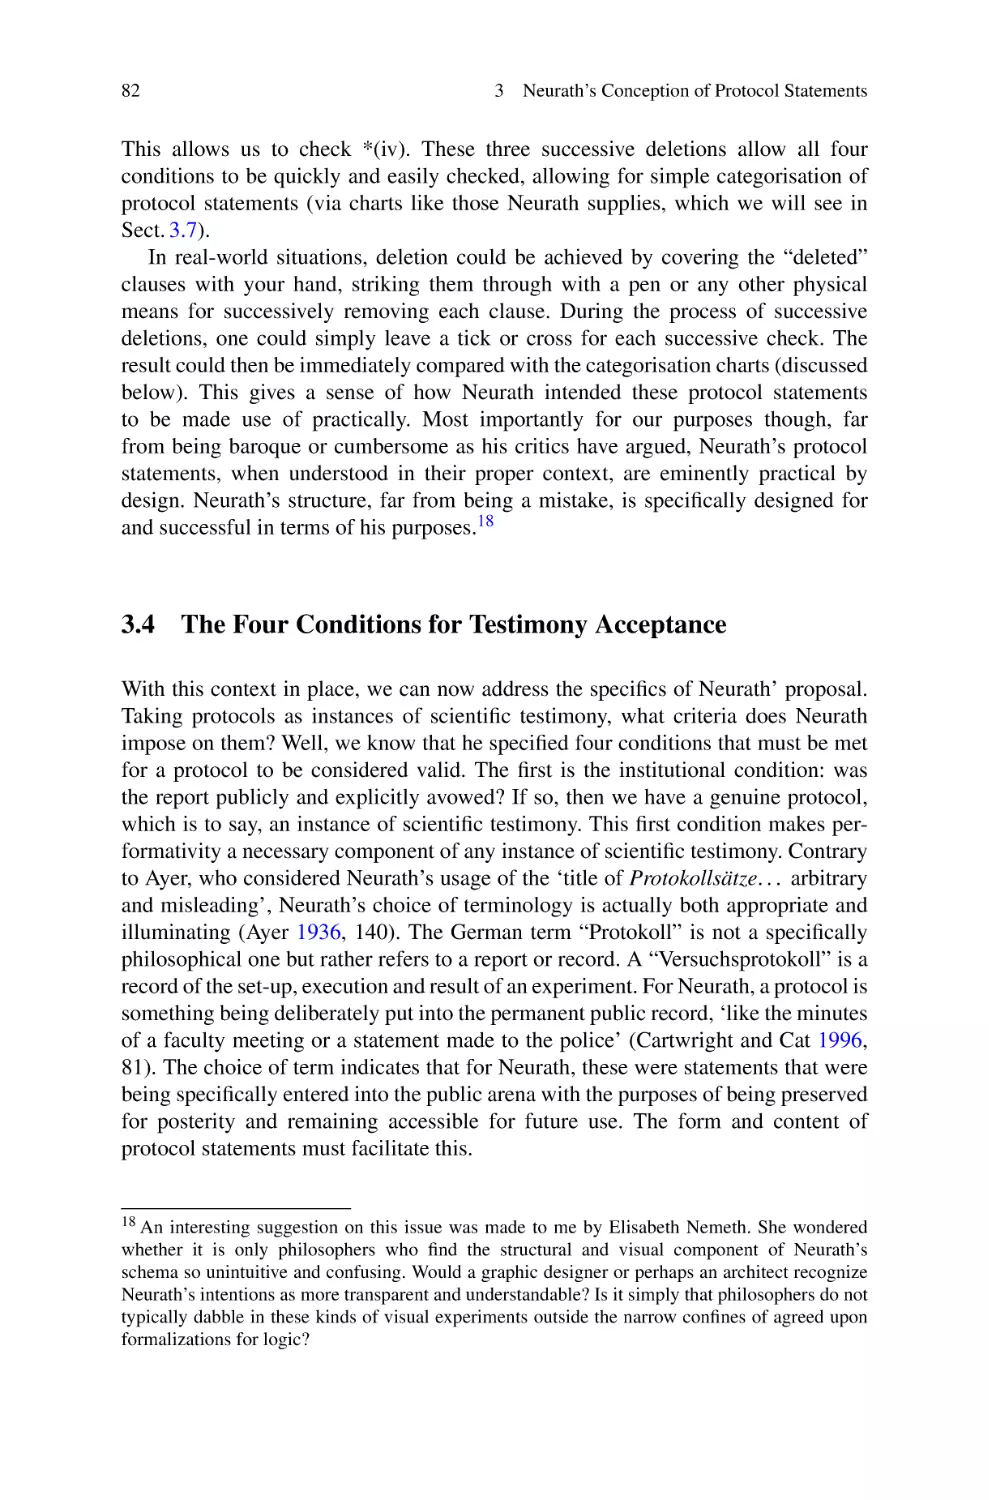 3.4 The Four Conditions for Testimony Acceptance